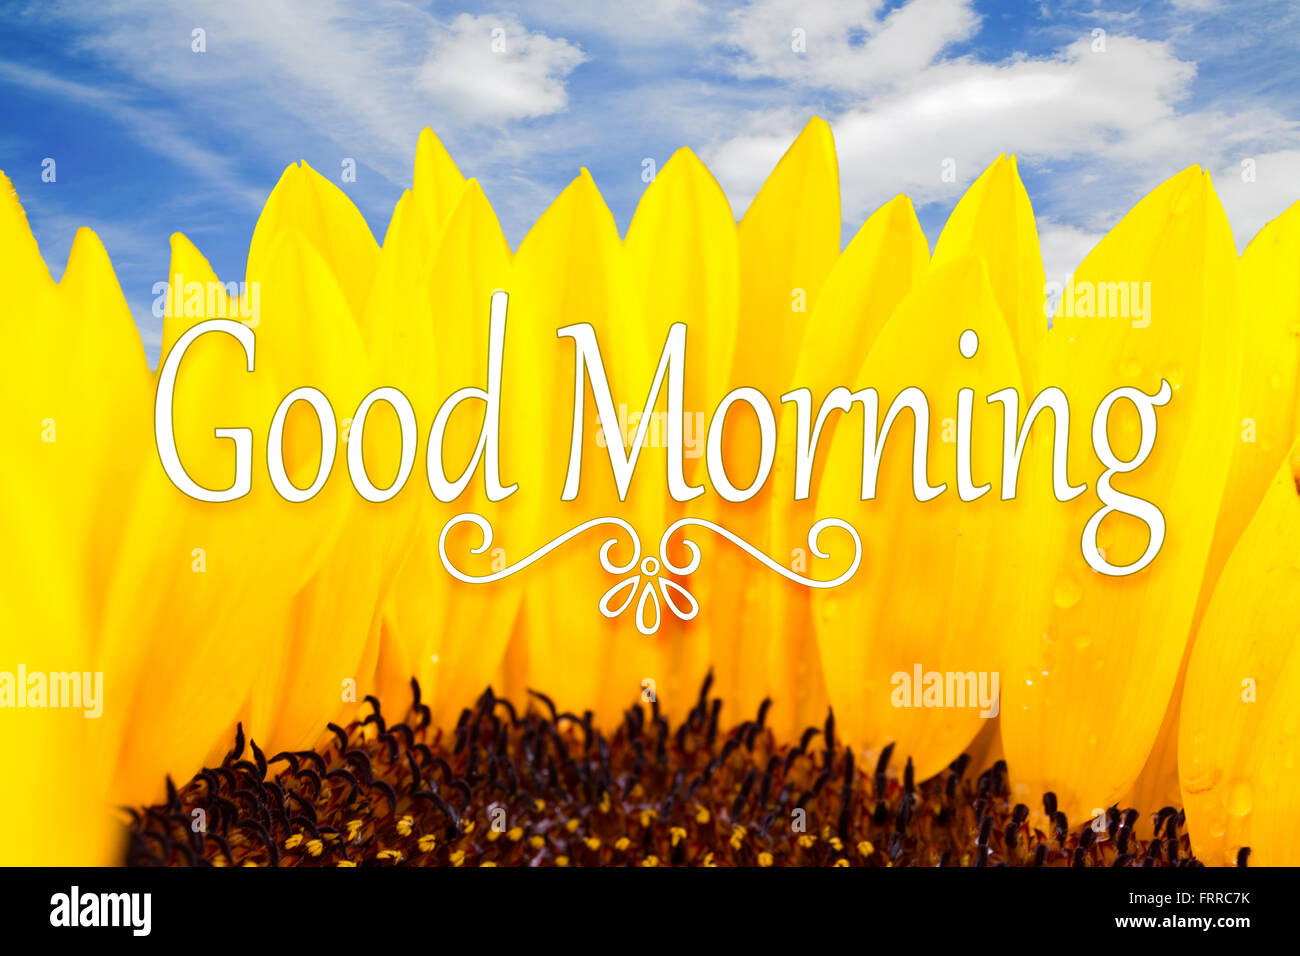 Good Morning inspirational quote on a sunflower Stock Photo - Alamy